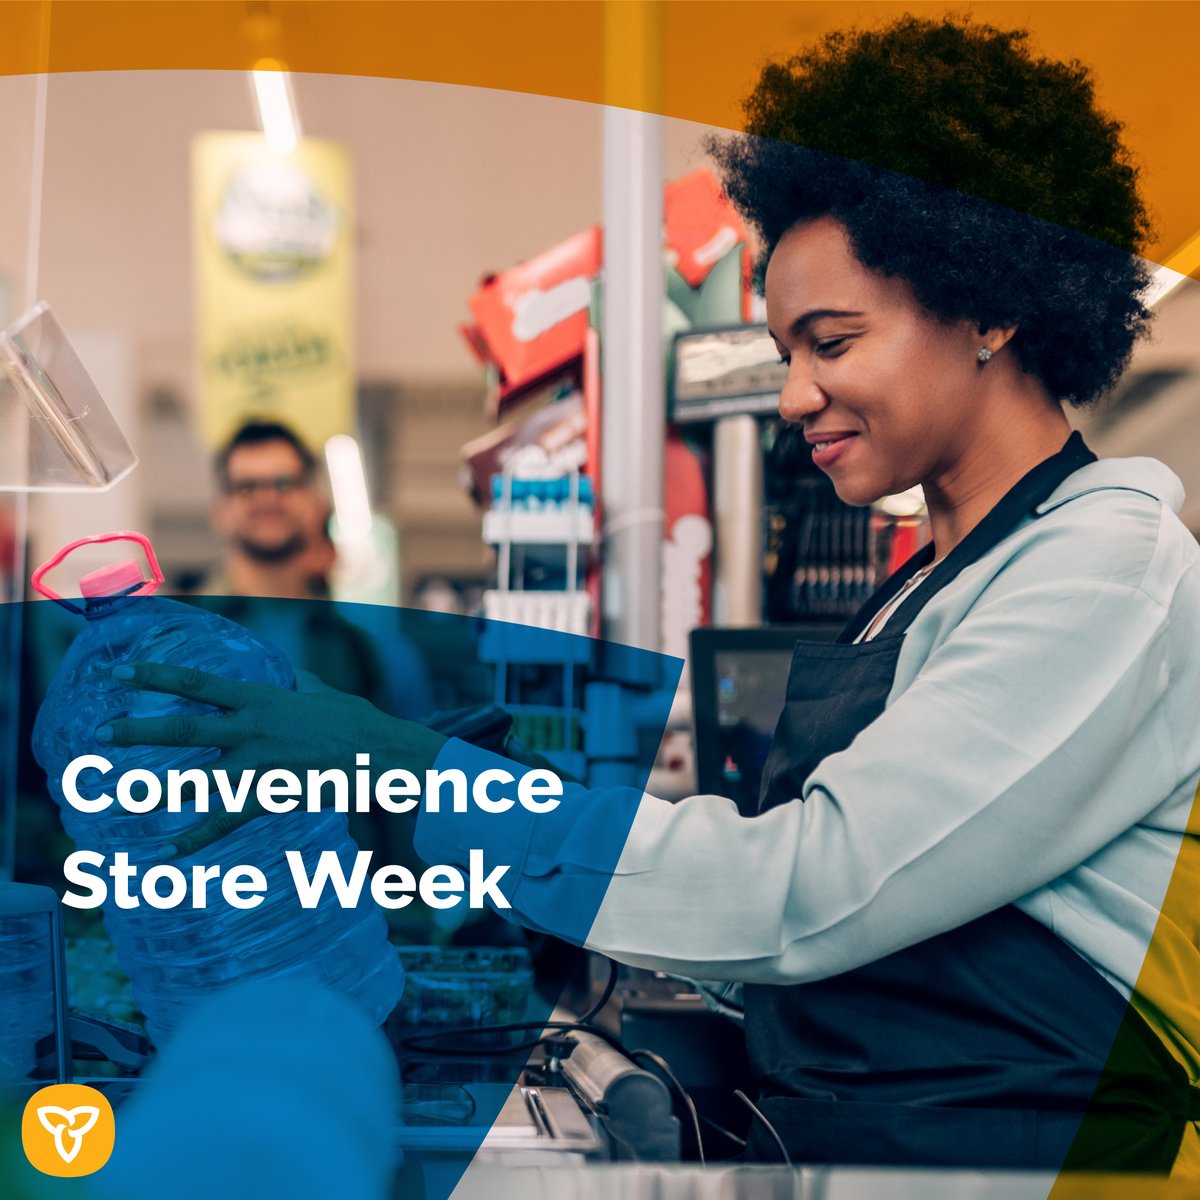 Ontario’s convenience stores provide people in their communities with daily necessities around the clock.

This #Convenienceweek, support local small businesses by visiting a convenience store in Thunder Bay-Atikokan

#SupportLocalON @OntarioCStores @ConvenienceCan